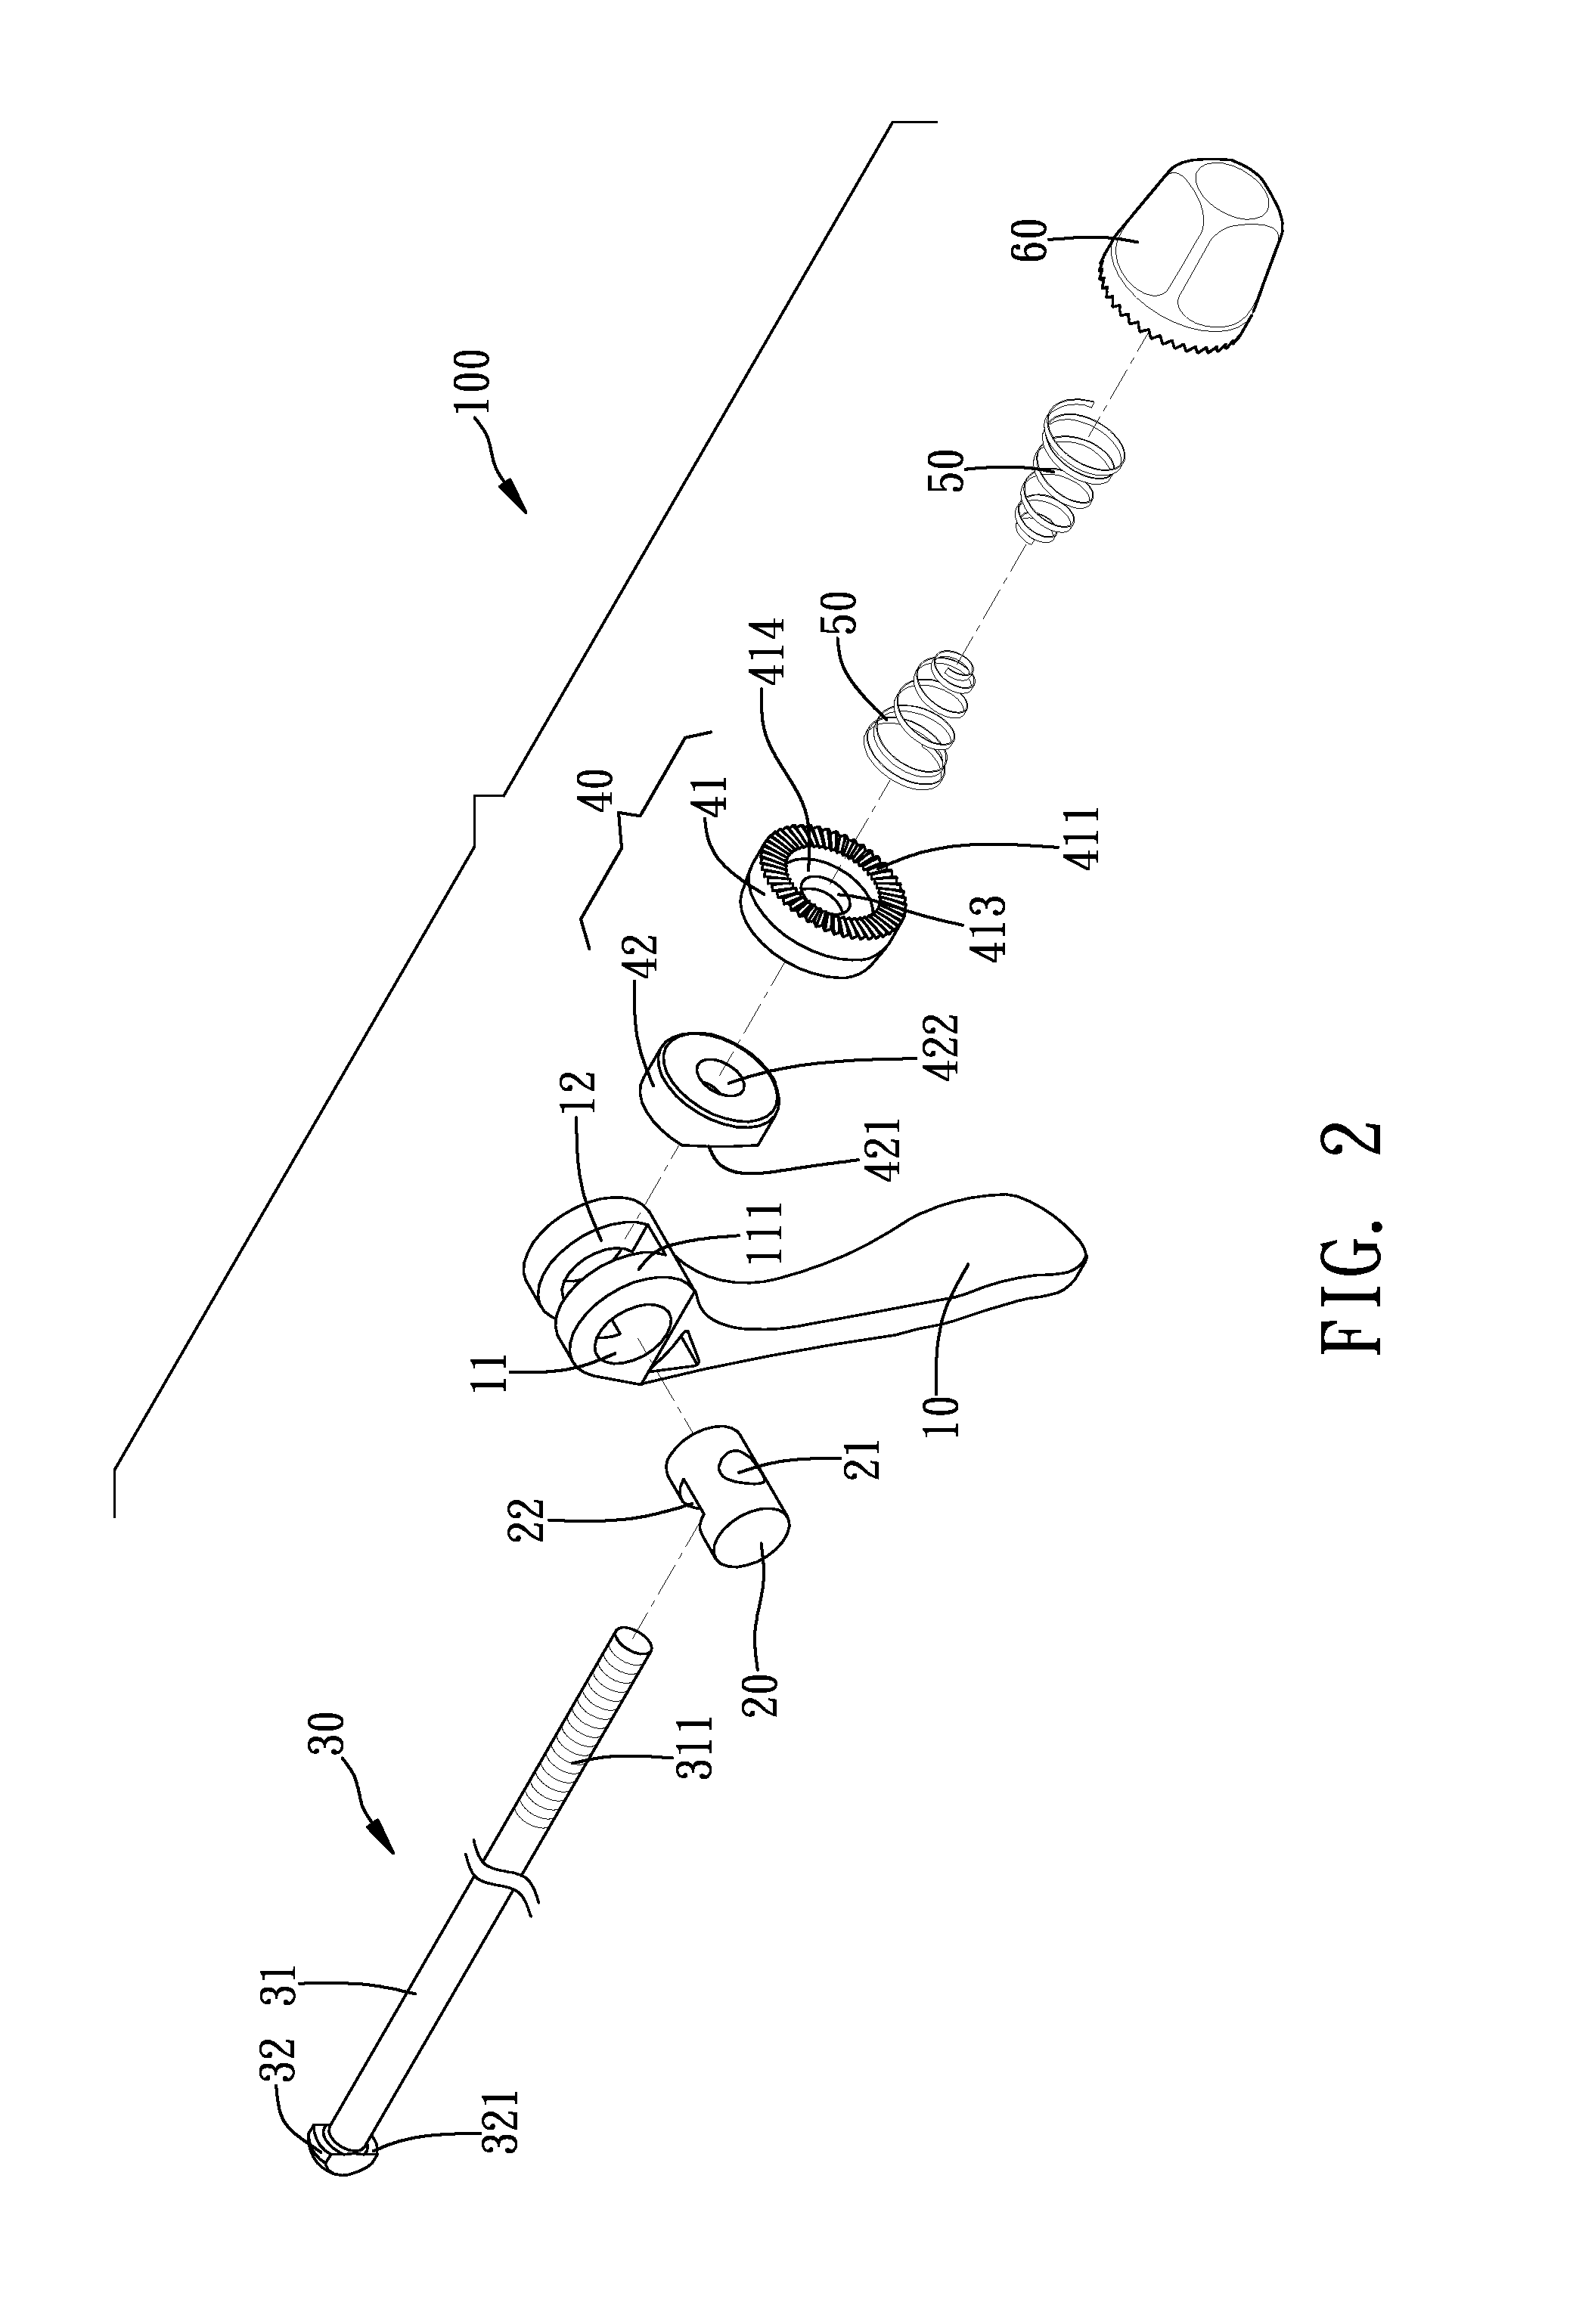 Quick-release device for use on a bicycle